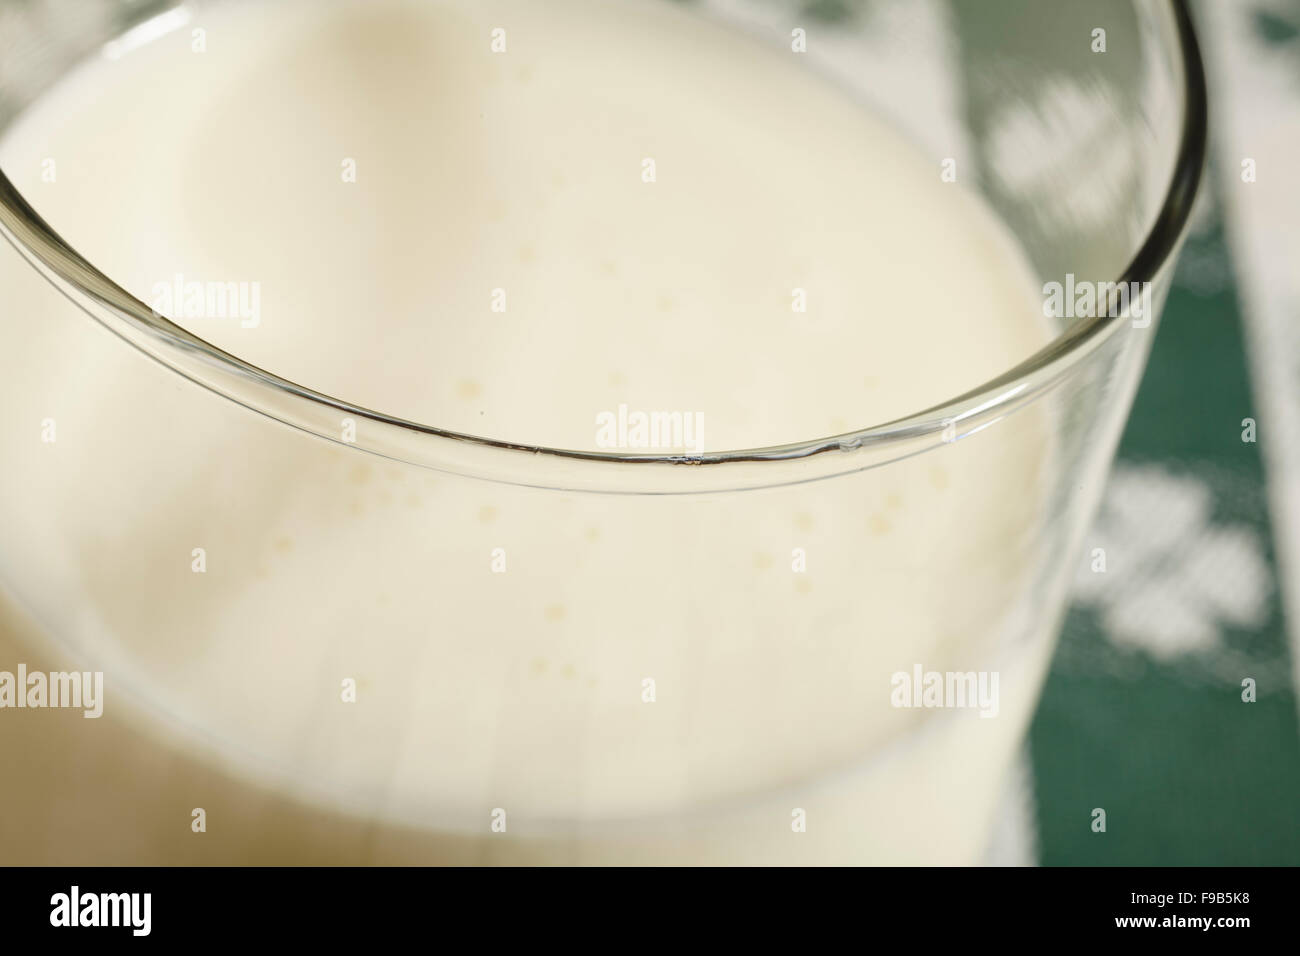 A glass of buttermilk Stock Photo